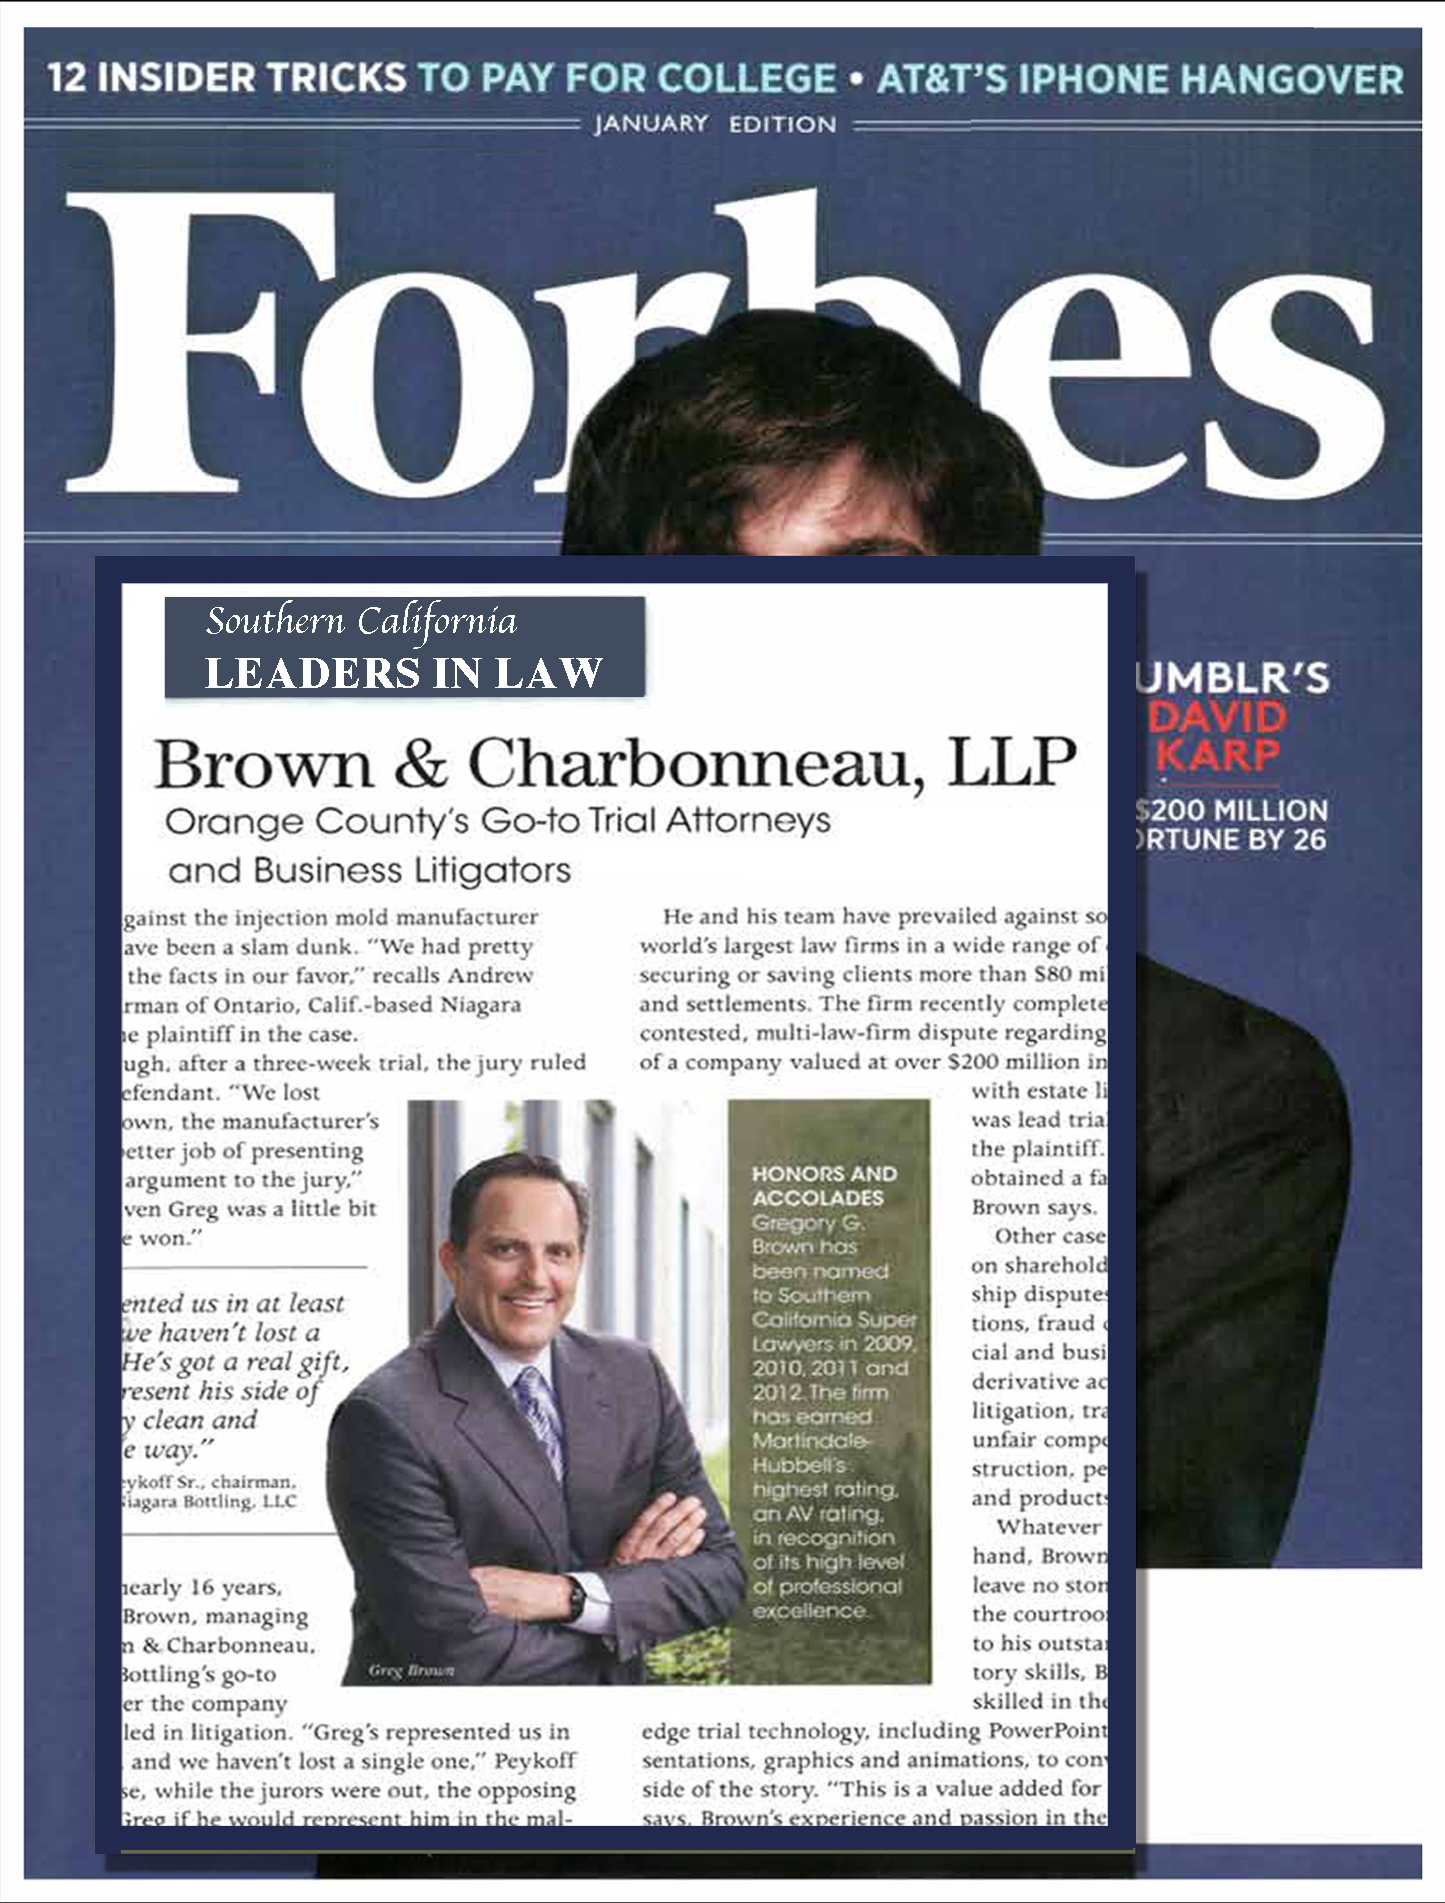 Forbes Magazine's Leaders in Law - Gregory G. Brown